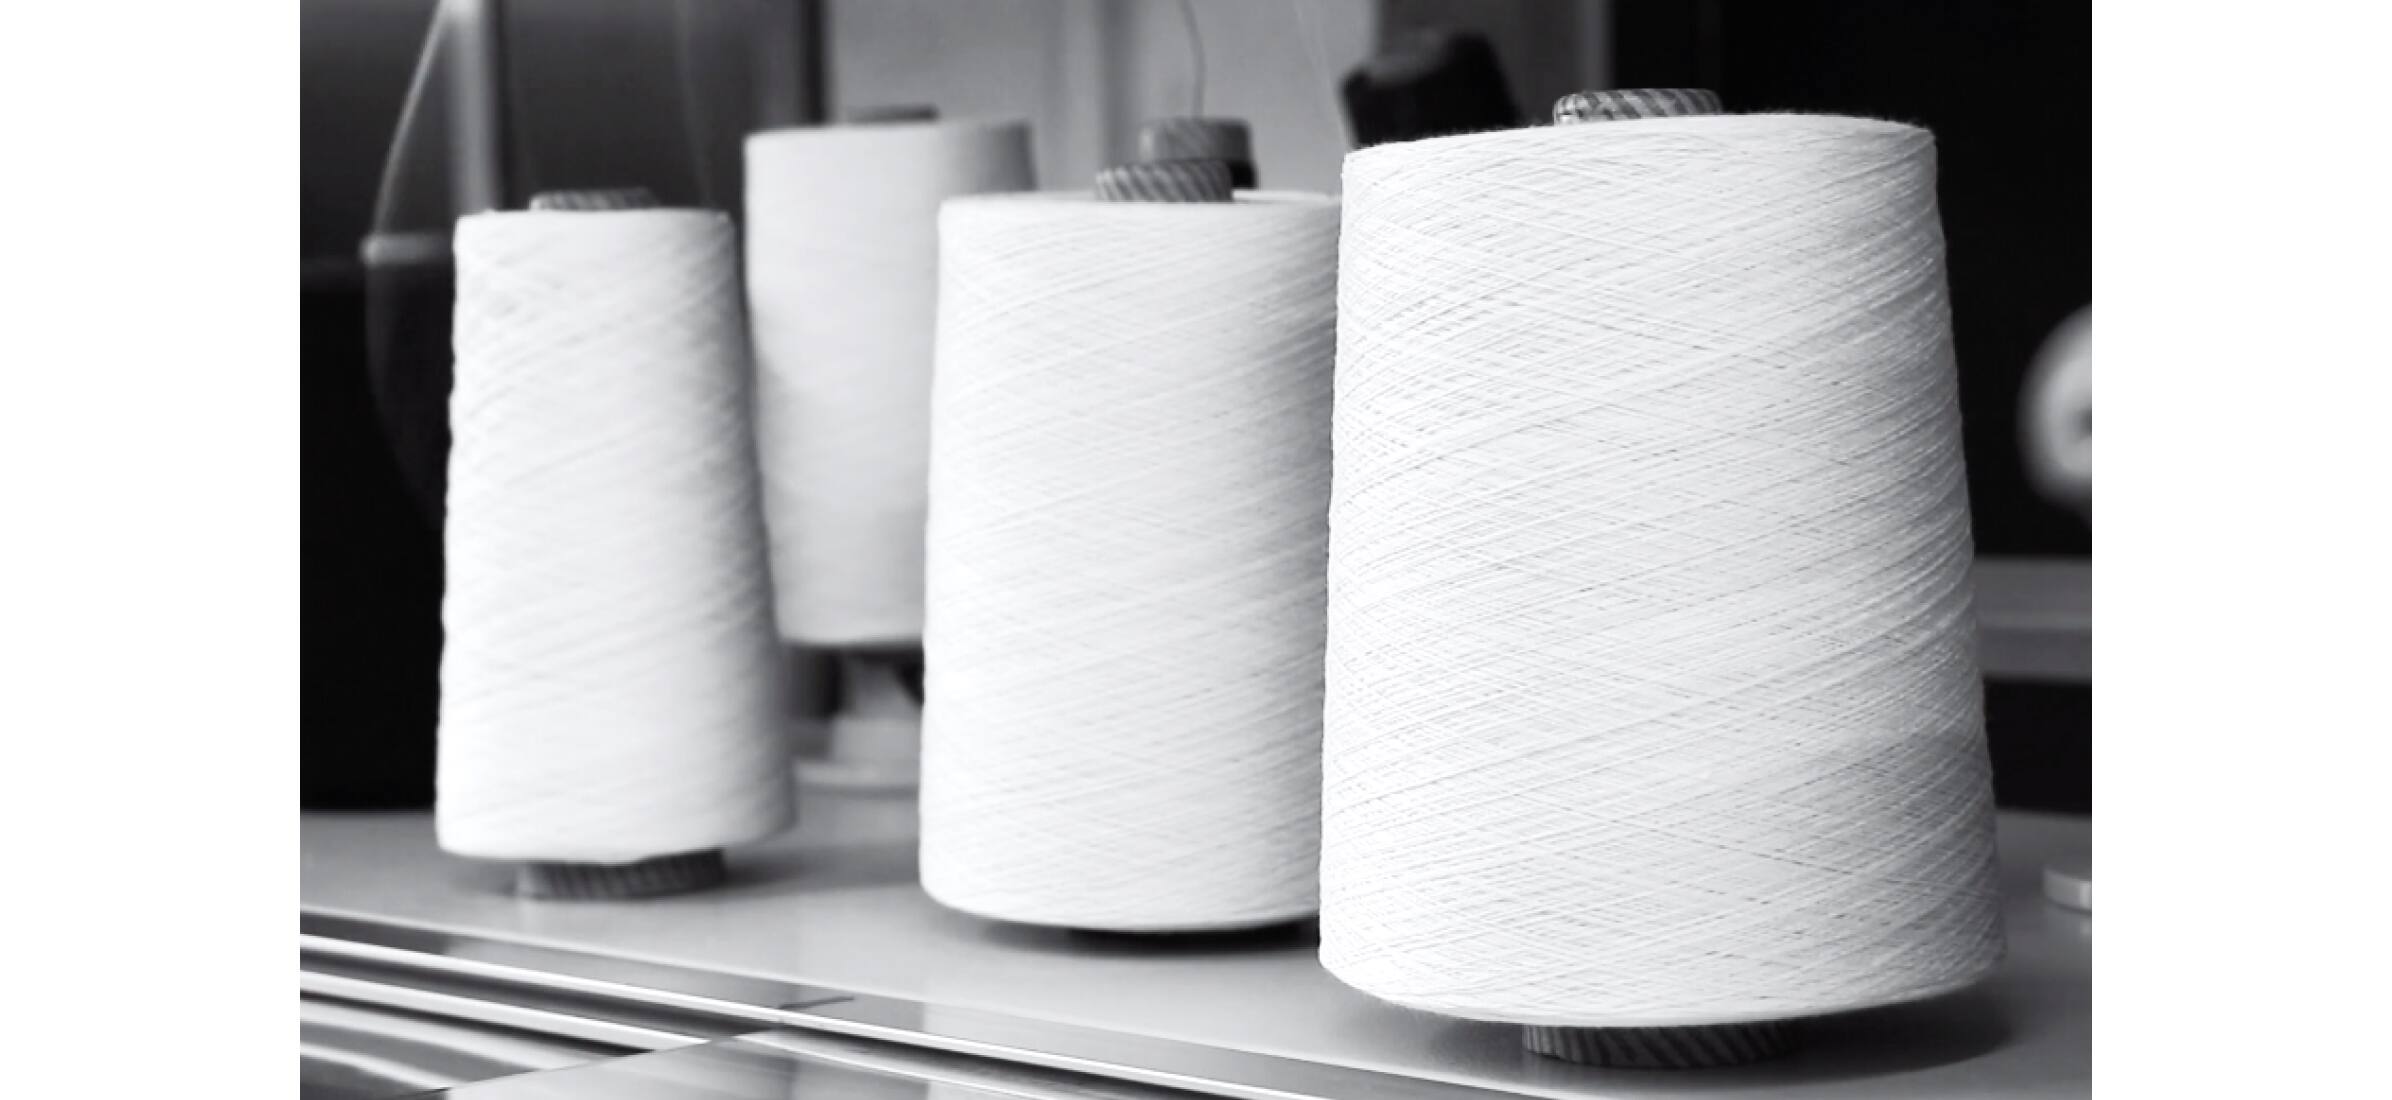 Four spools of white thread sitting on a workshop bench ready for use.